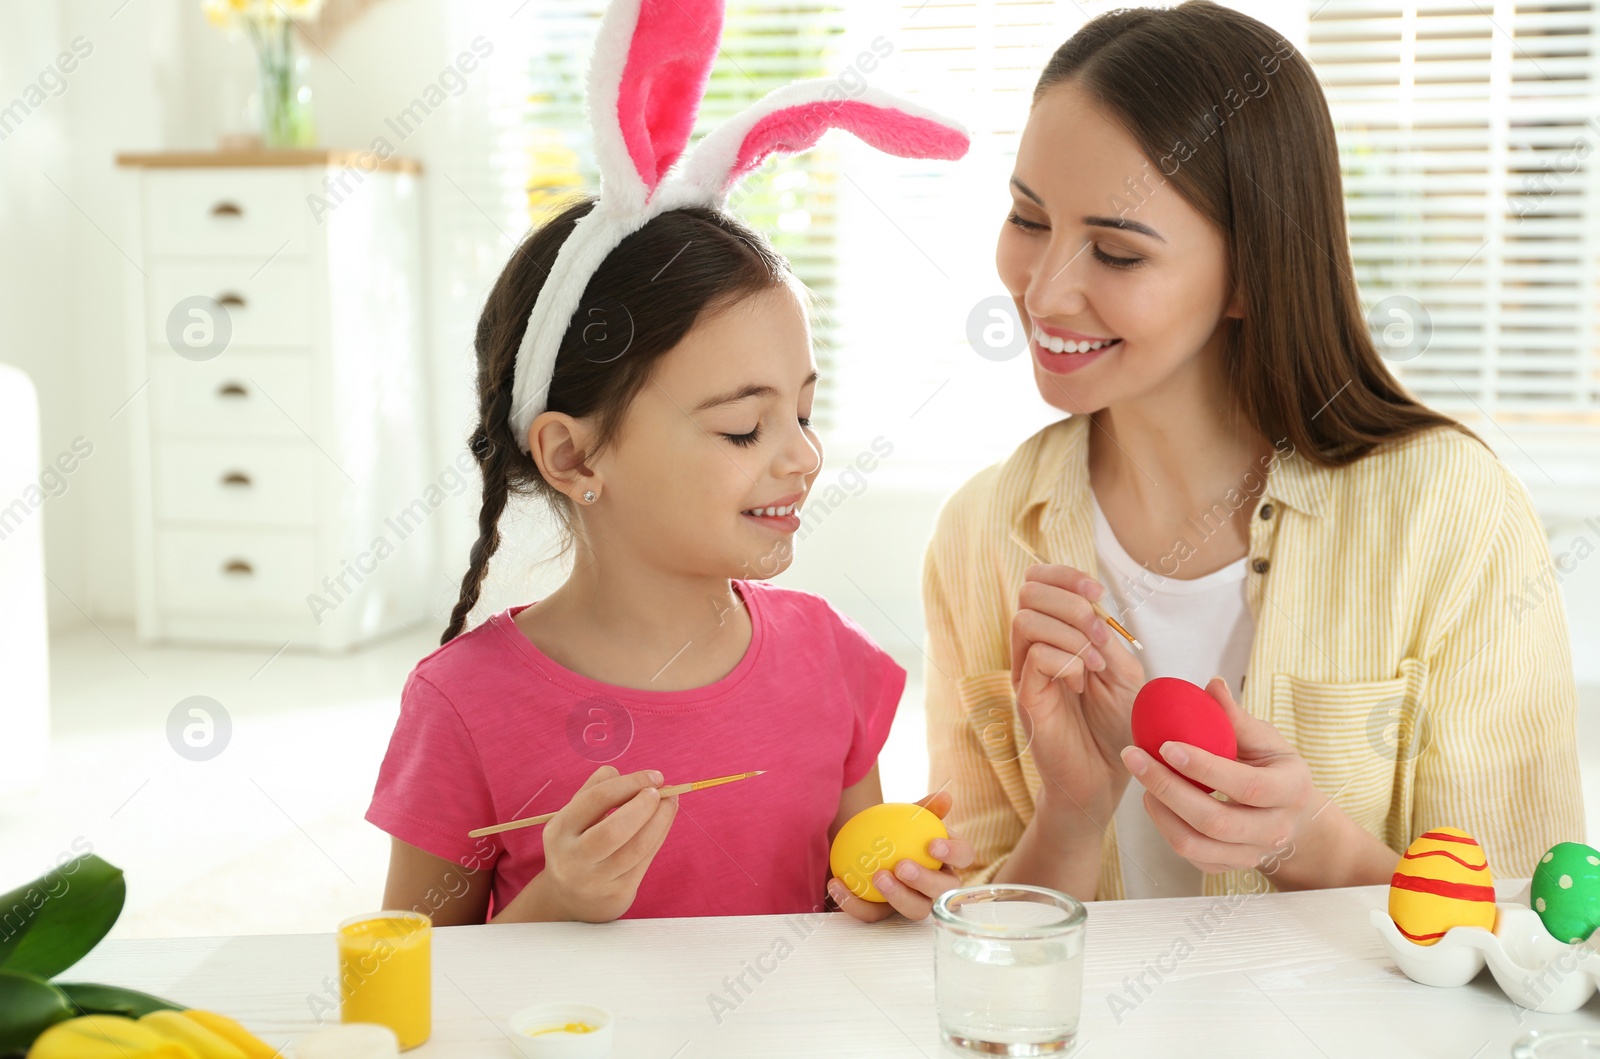 Photo of Happy daughter with bunny ears headband and her mother painting Easter eggs at home